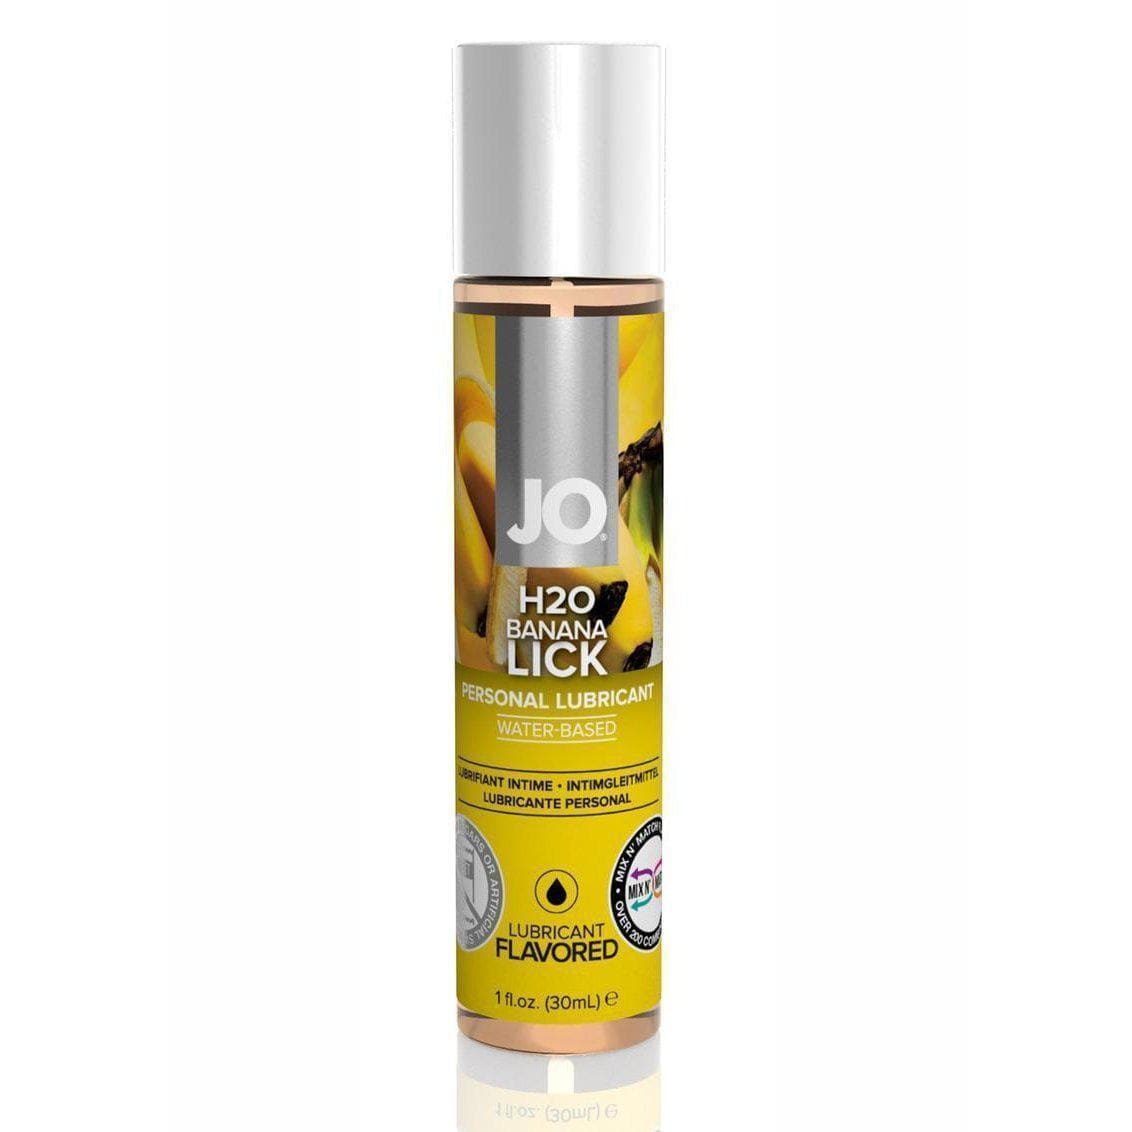 JO H2O Water Based Natural Flavor Extracts Lubricant Banana Lick - Romantic Blessings